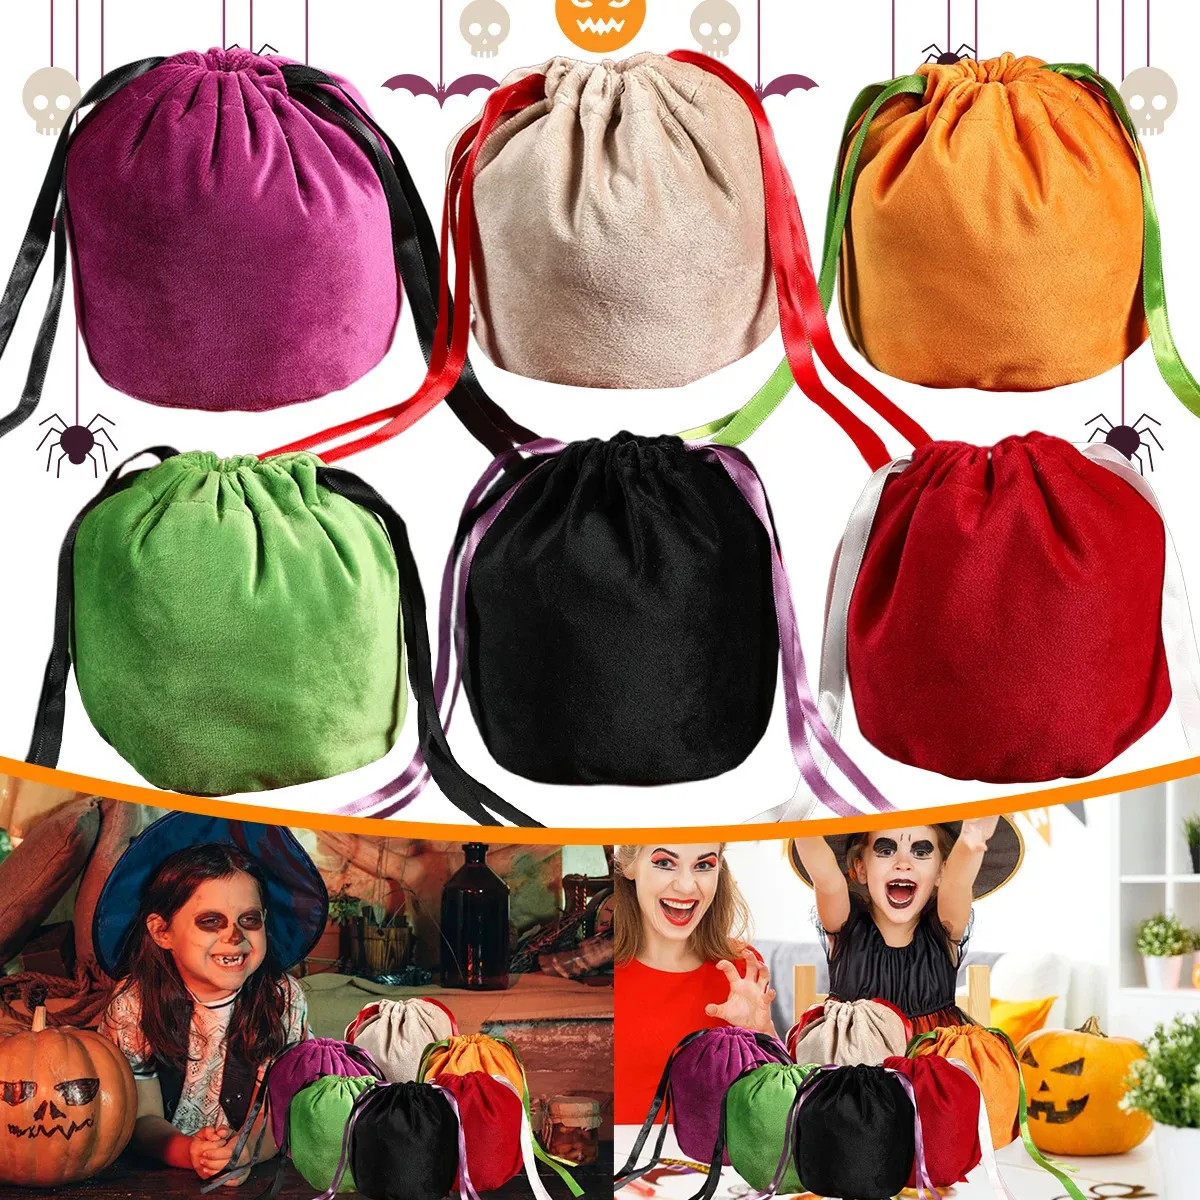 Gift Wrap 10/20Pcs Halloween Gift Bags Orange Velvet Packaging Bag with Drawstring Treat or Trick Gift Box Candy Pouch Christma Favors 231102